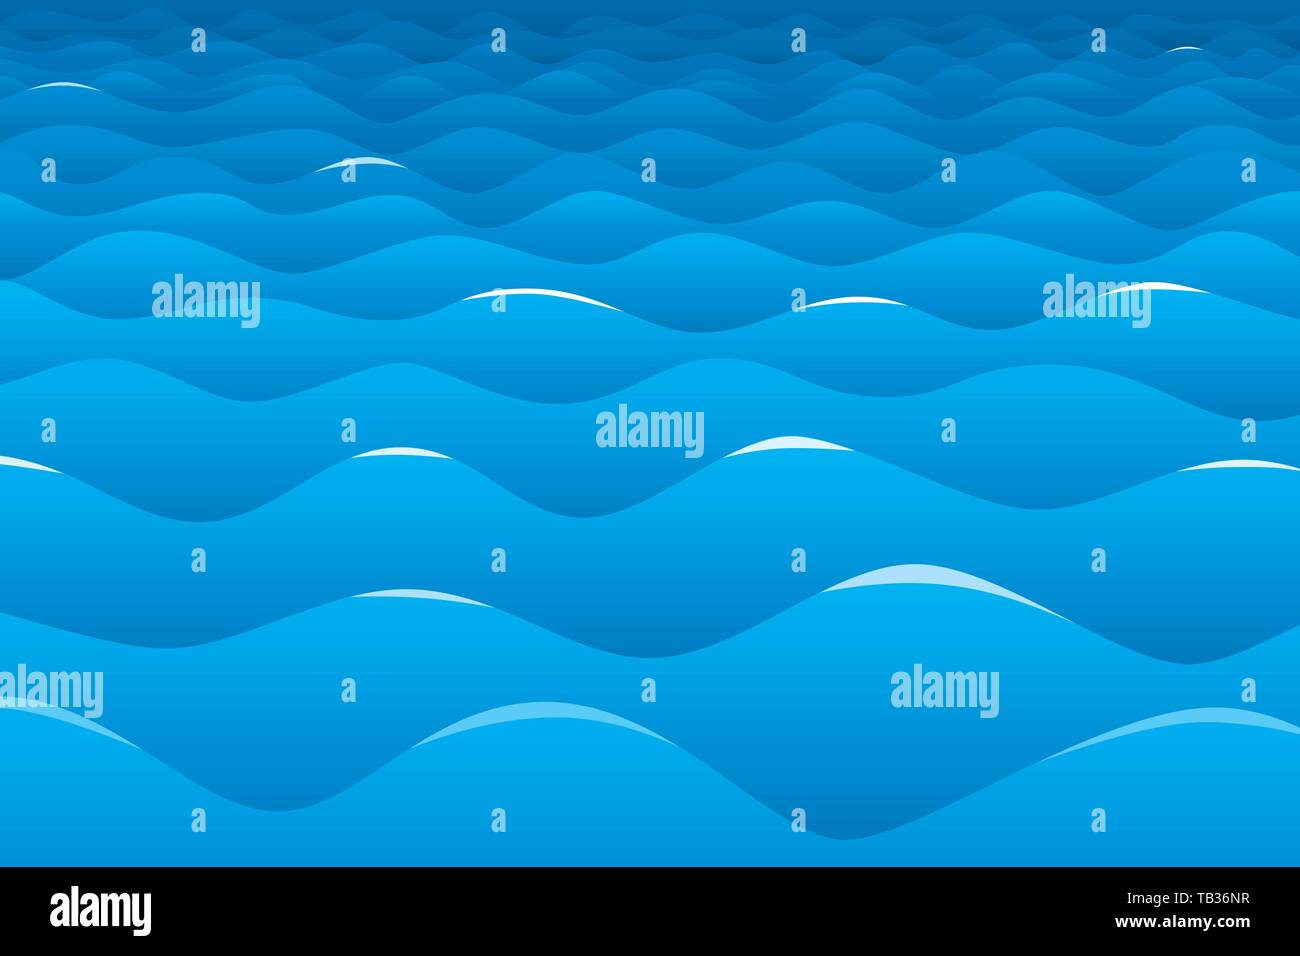 Vector illustration. Ocean background with blue waves and ...